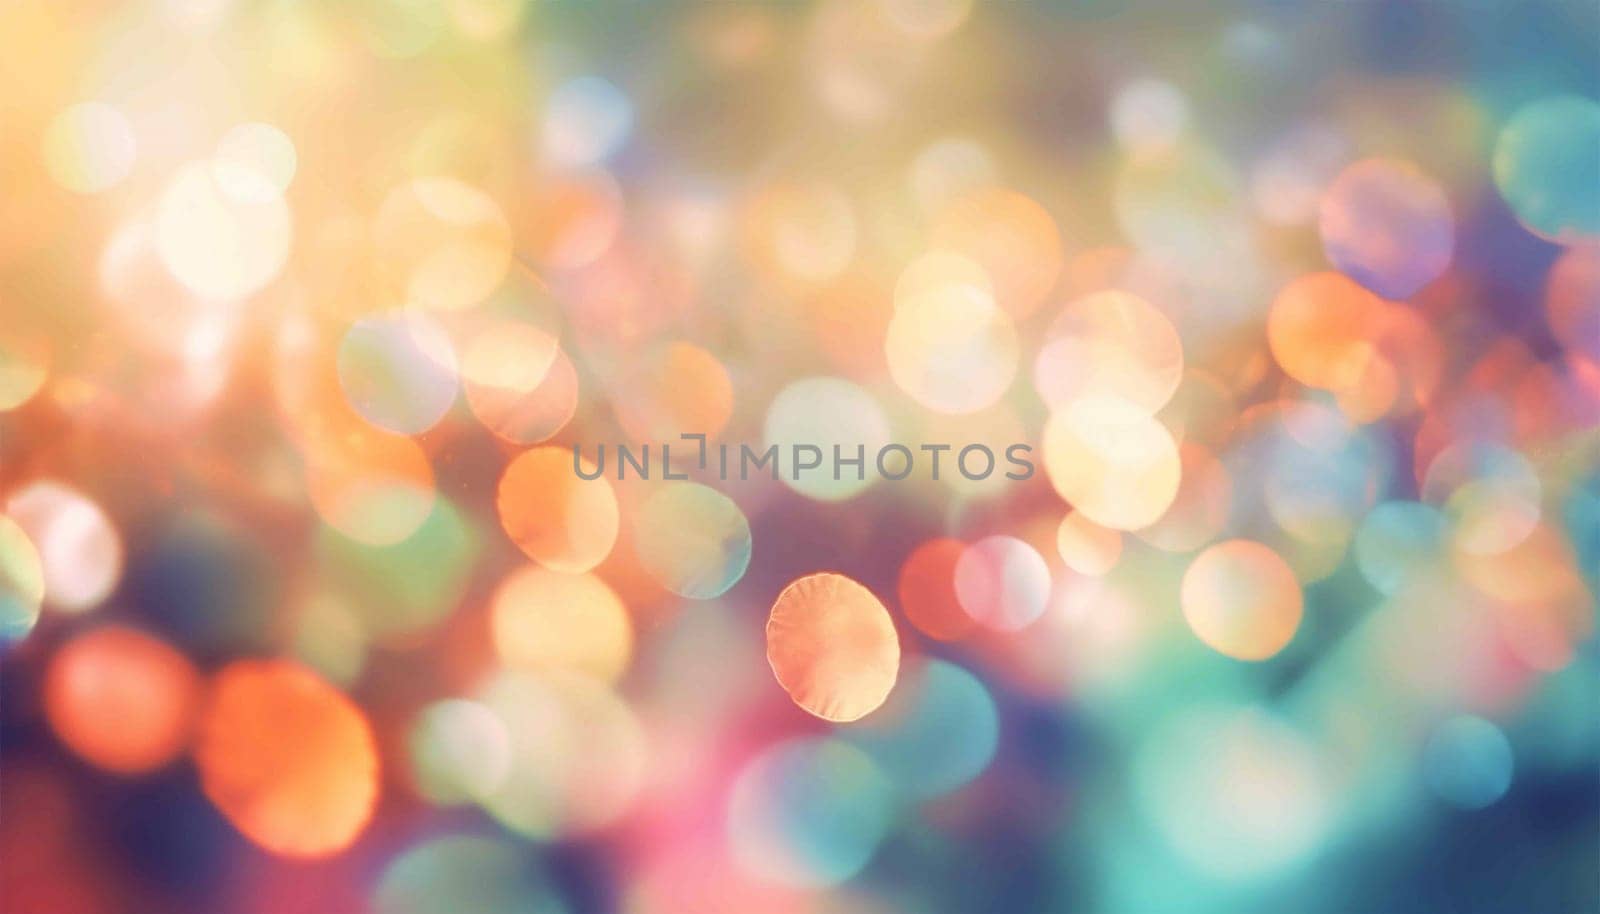 Defocused abstract bokeh background pastel colored, flare from lights, blurred round bokeh as holiday fon, celebration wallpaper. Glittering aesthetic textured pattern Purple,pink neon lights by Annebel146